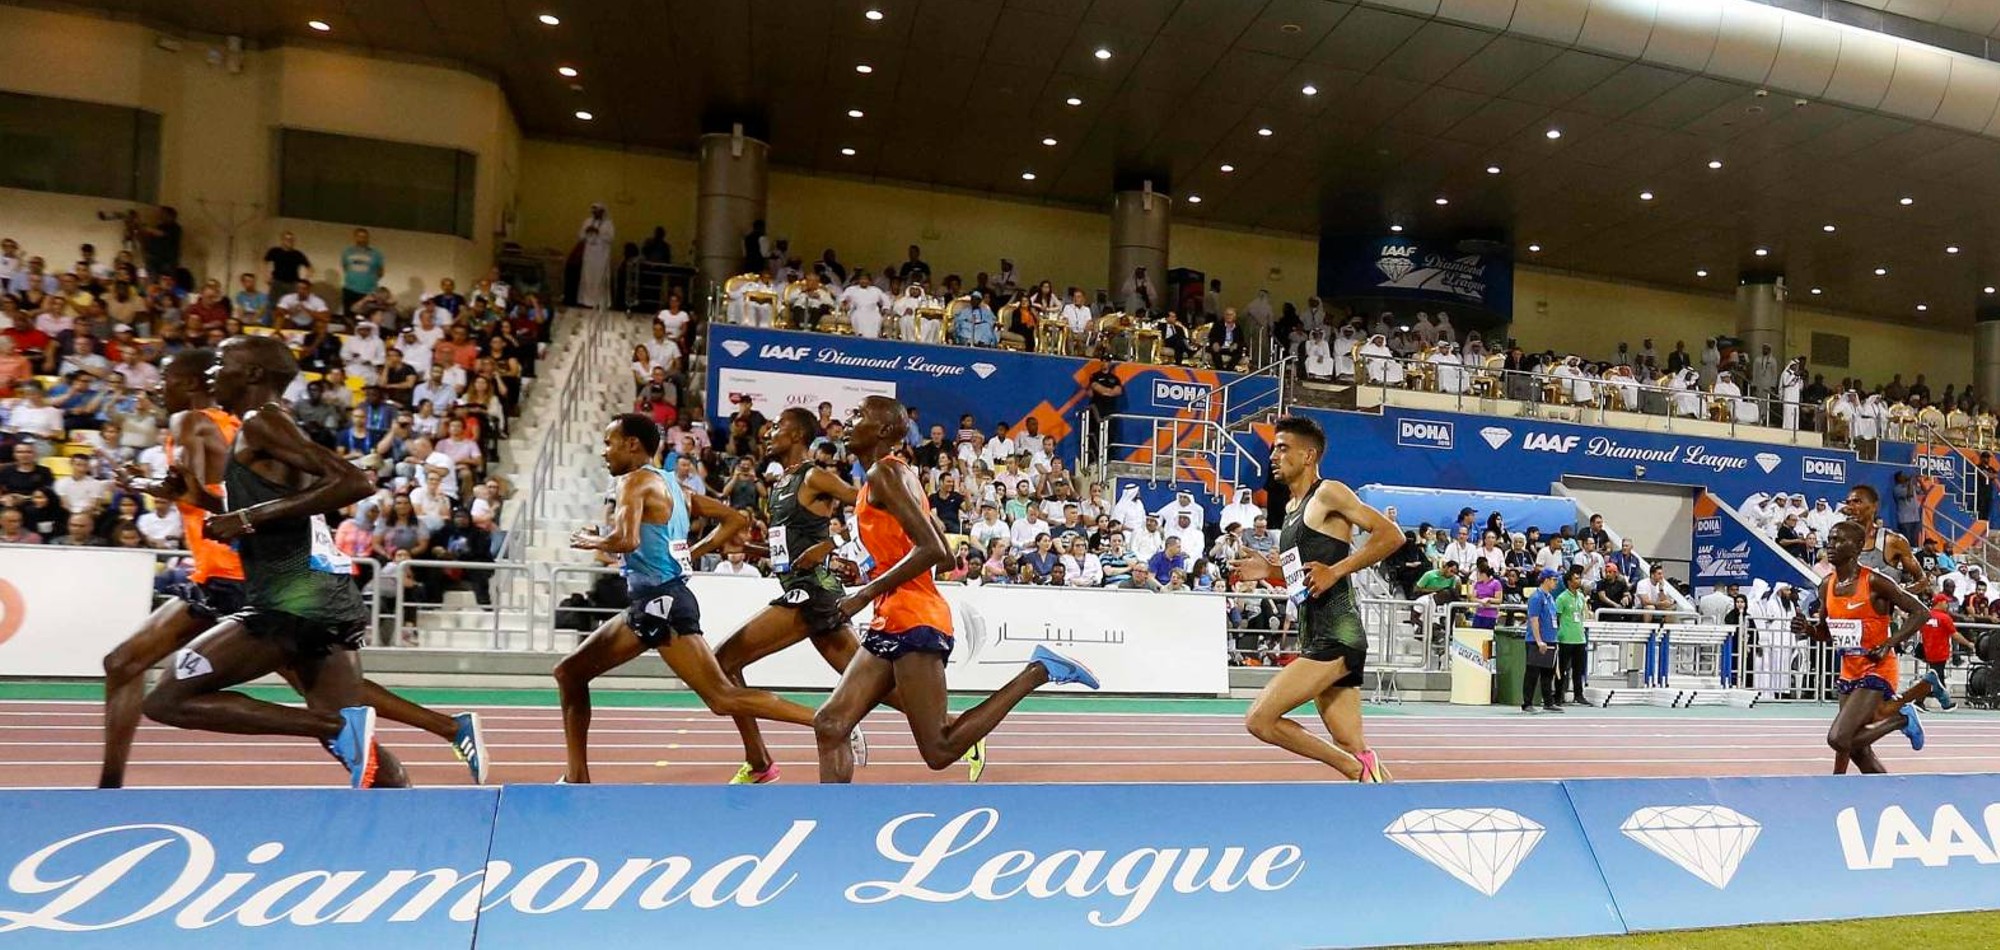 Doha Hosts First Round of Diamond League on May 13